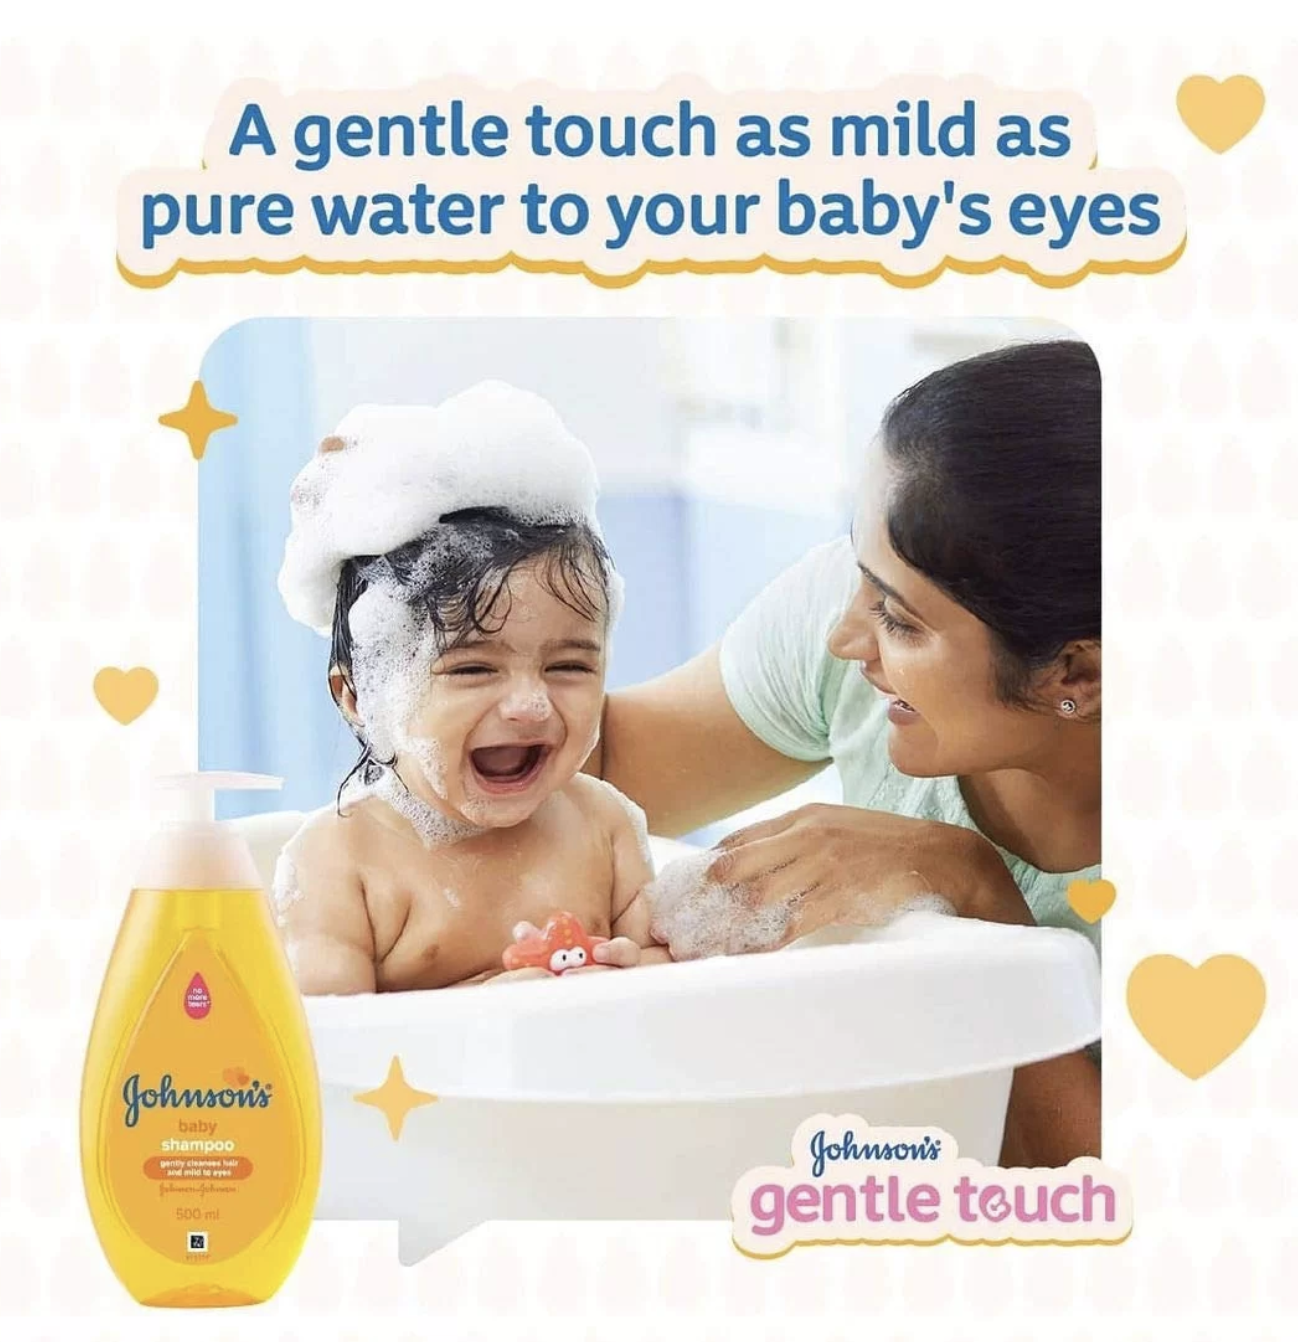 Johnson & Johnson uses soft baby images in their product content